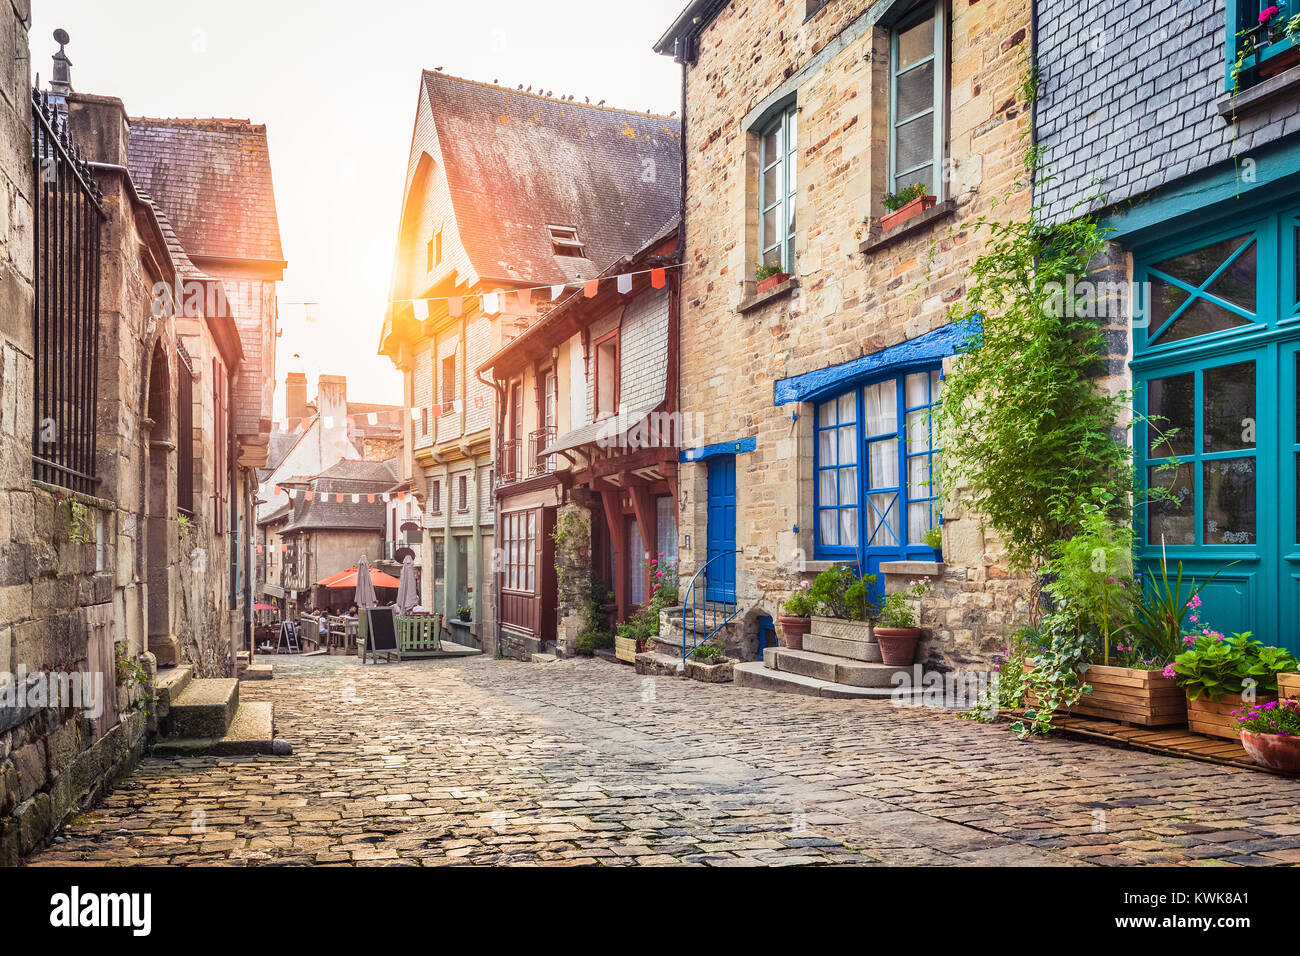 Panoramic view of a charming street scene in an old town in Europe in beautiful evening light at sunset with retro vintage filter effect Stock Photo